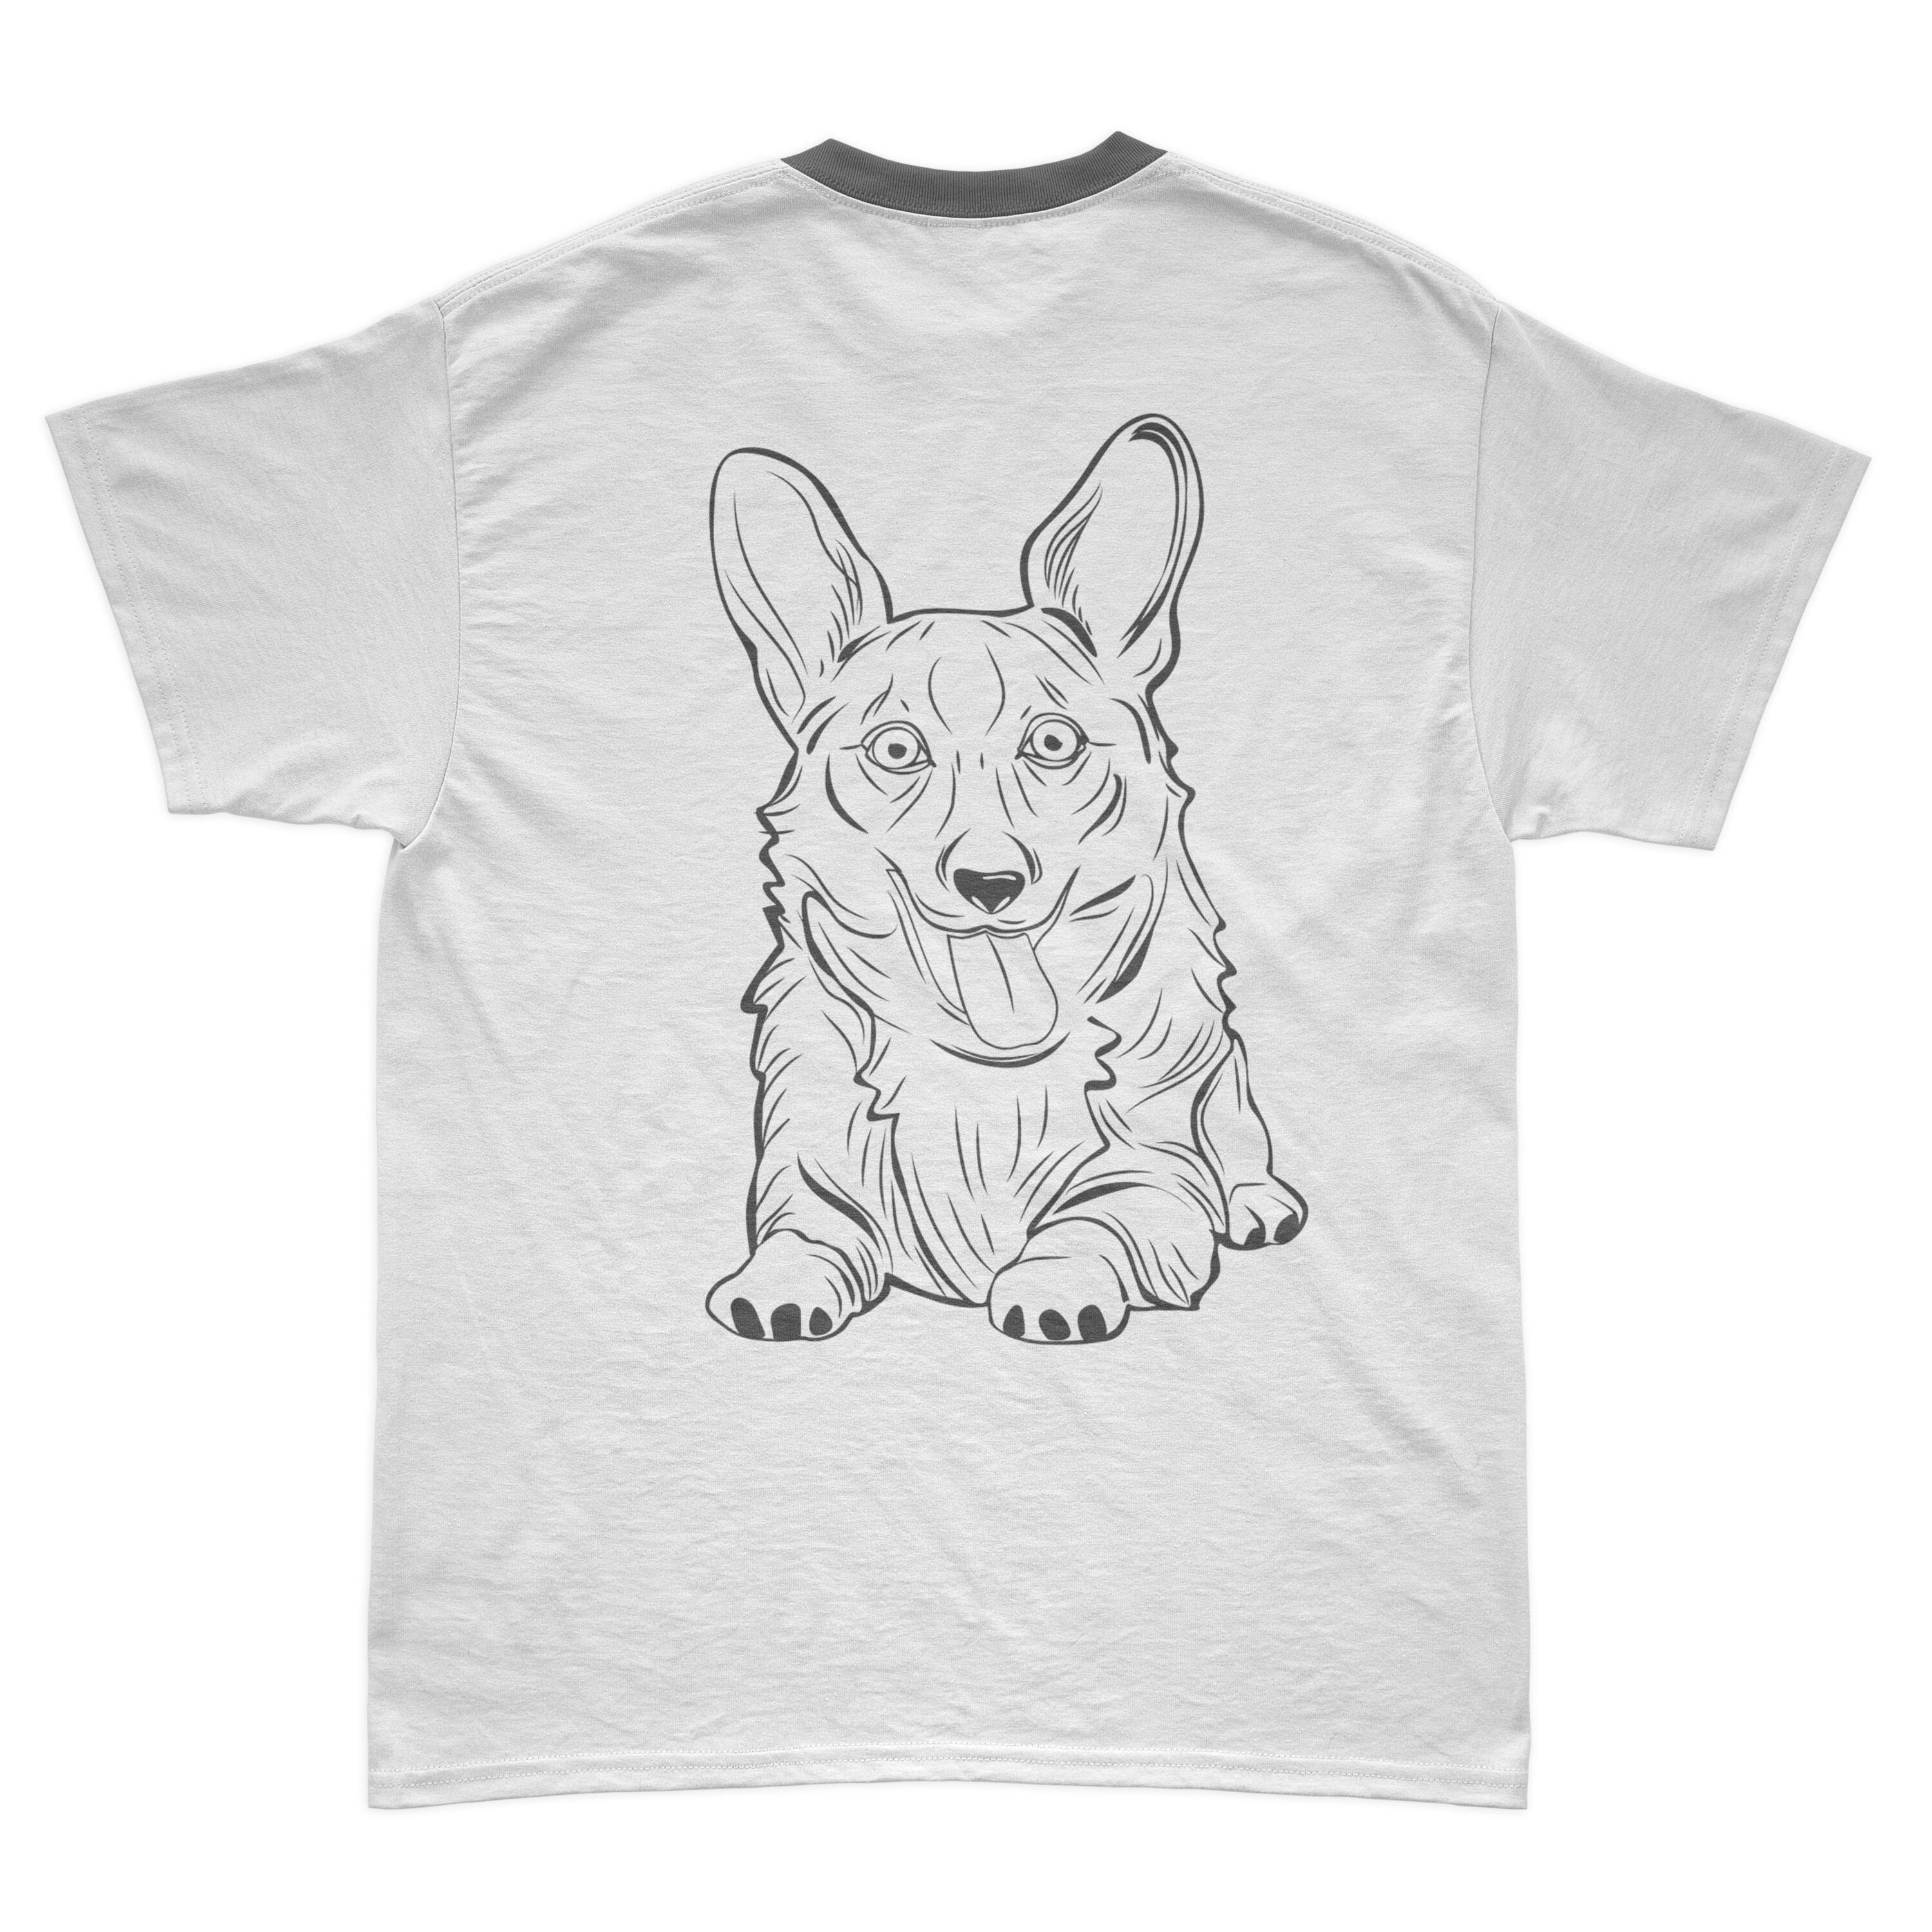 Happy corgi in an outline style.